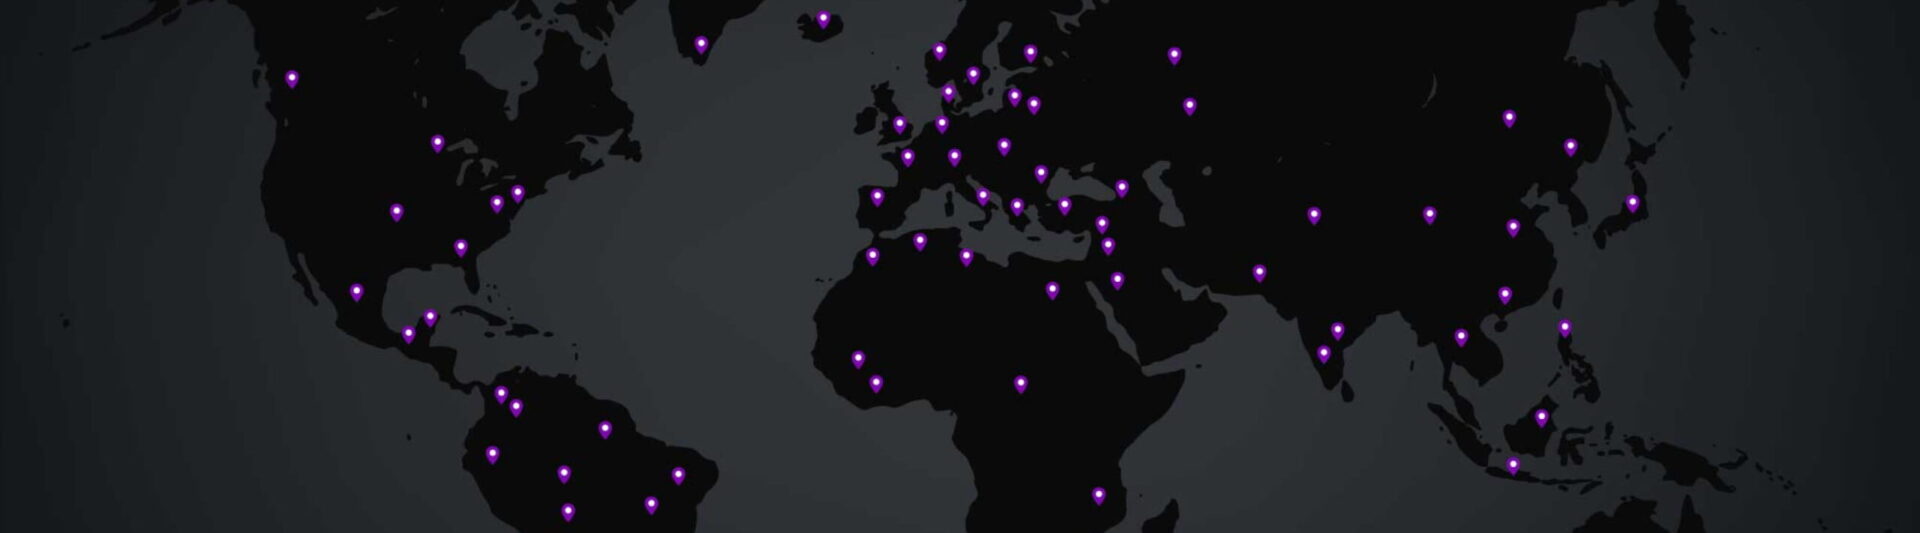 A map of the world on which Kramer's global presence is marked in purple dots